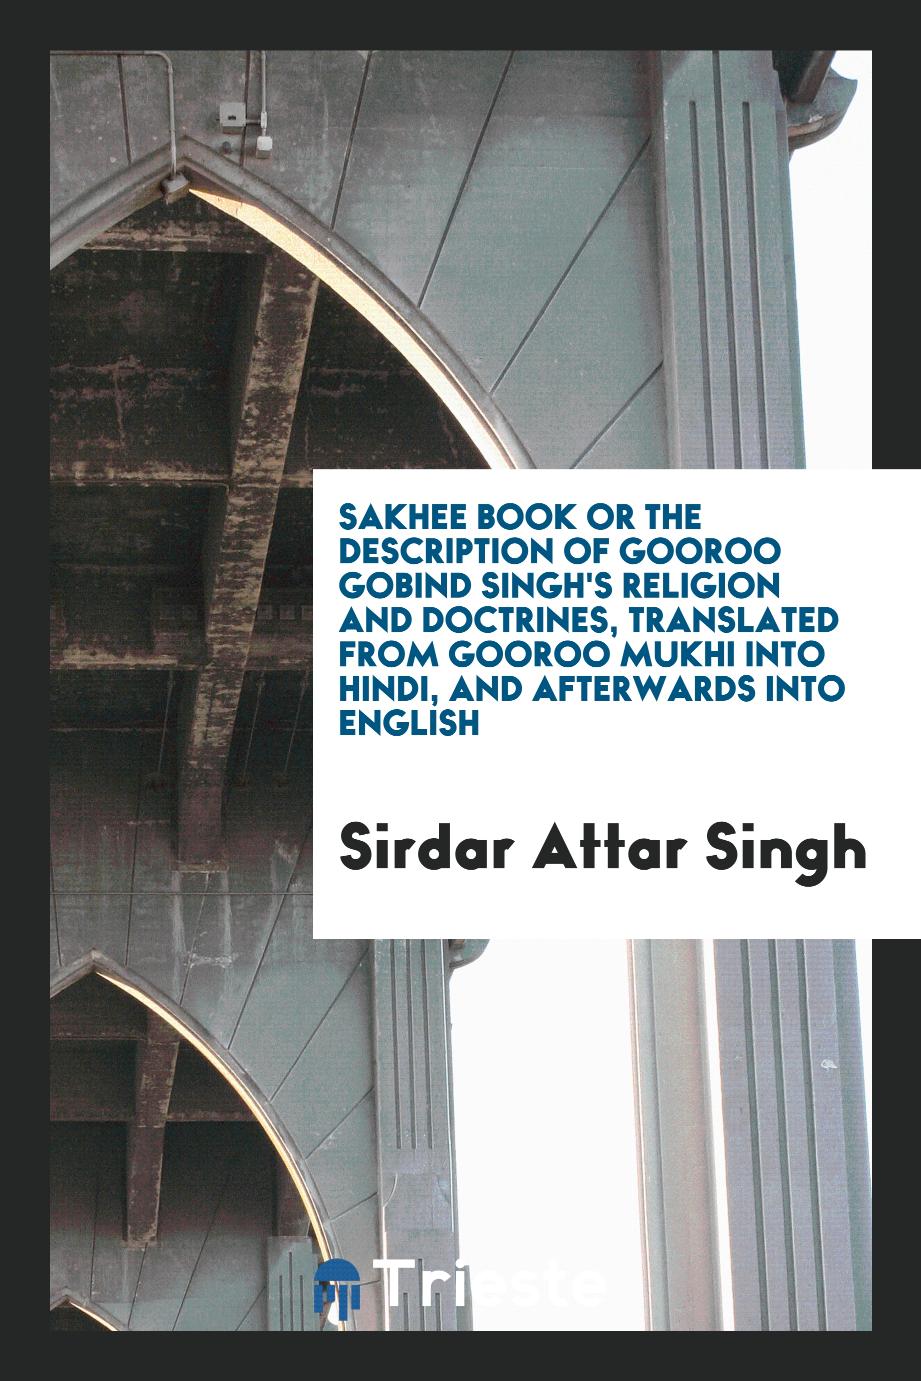 Sakhee Book or the Description of Gooroo Gobind Singh's Religion and Doctrines, Translated from Gooroo Mukhi into Hindi, and Afterwards into English